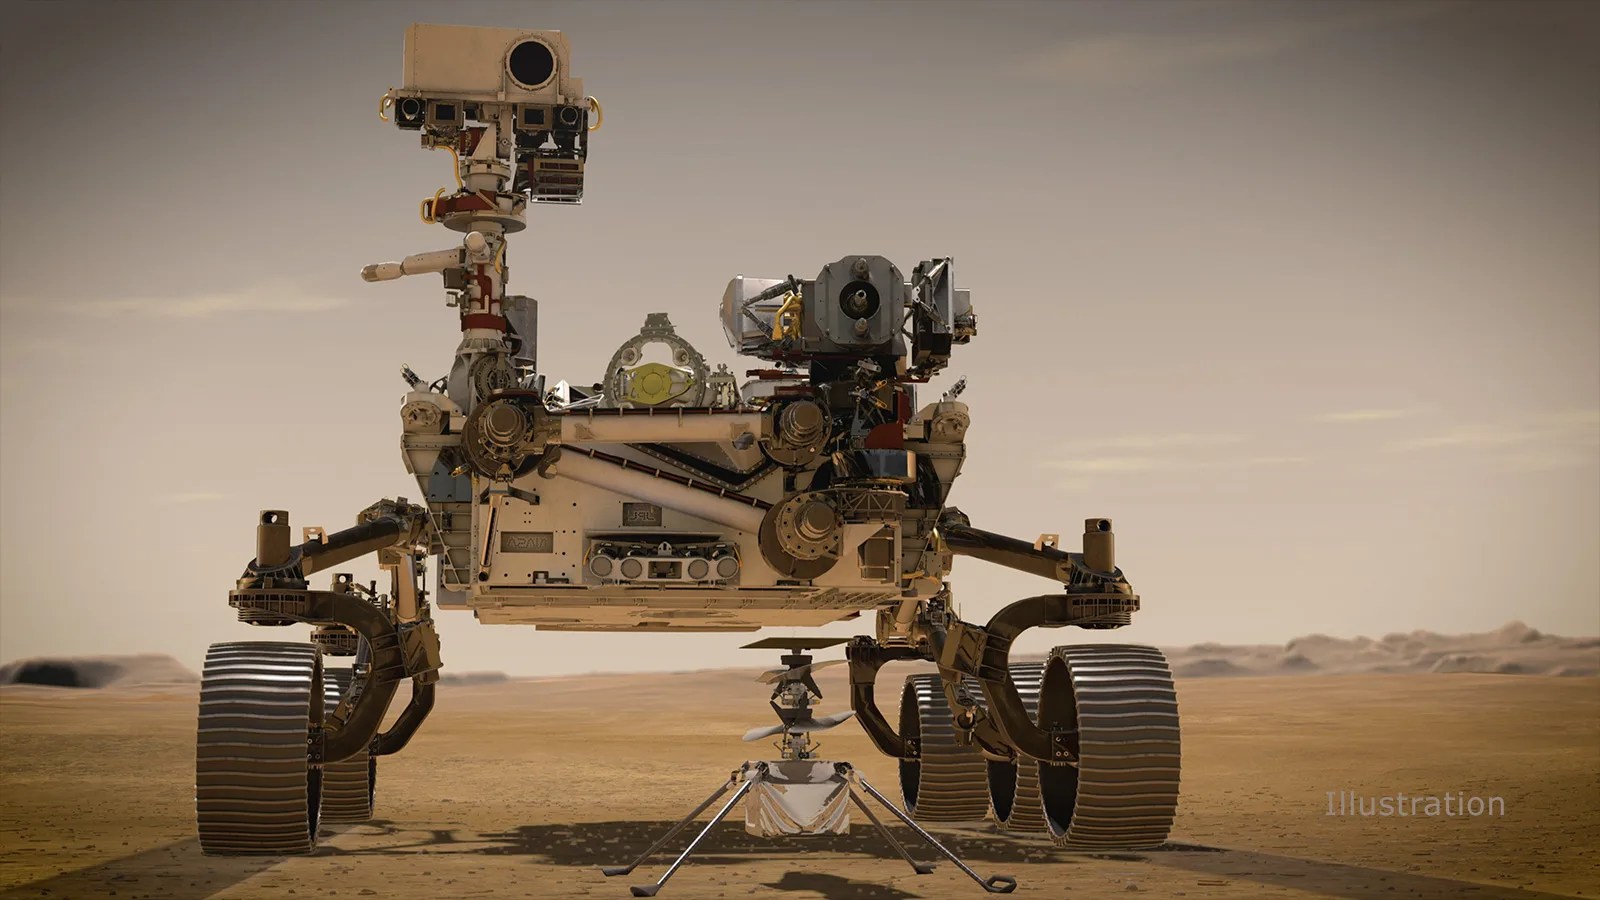 A rover sits on a sandy surface, with another smaller spacecraft in front.